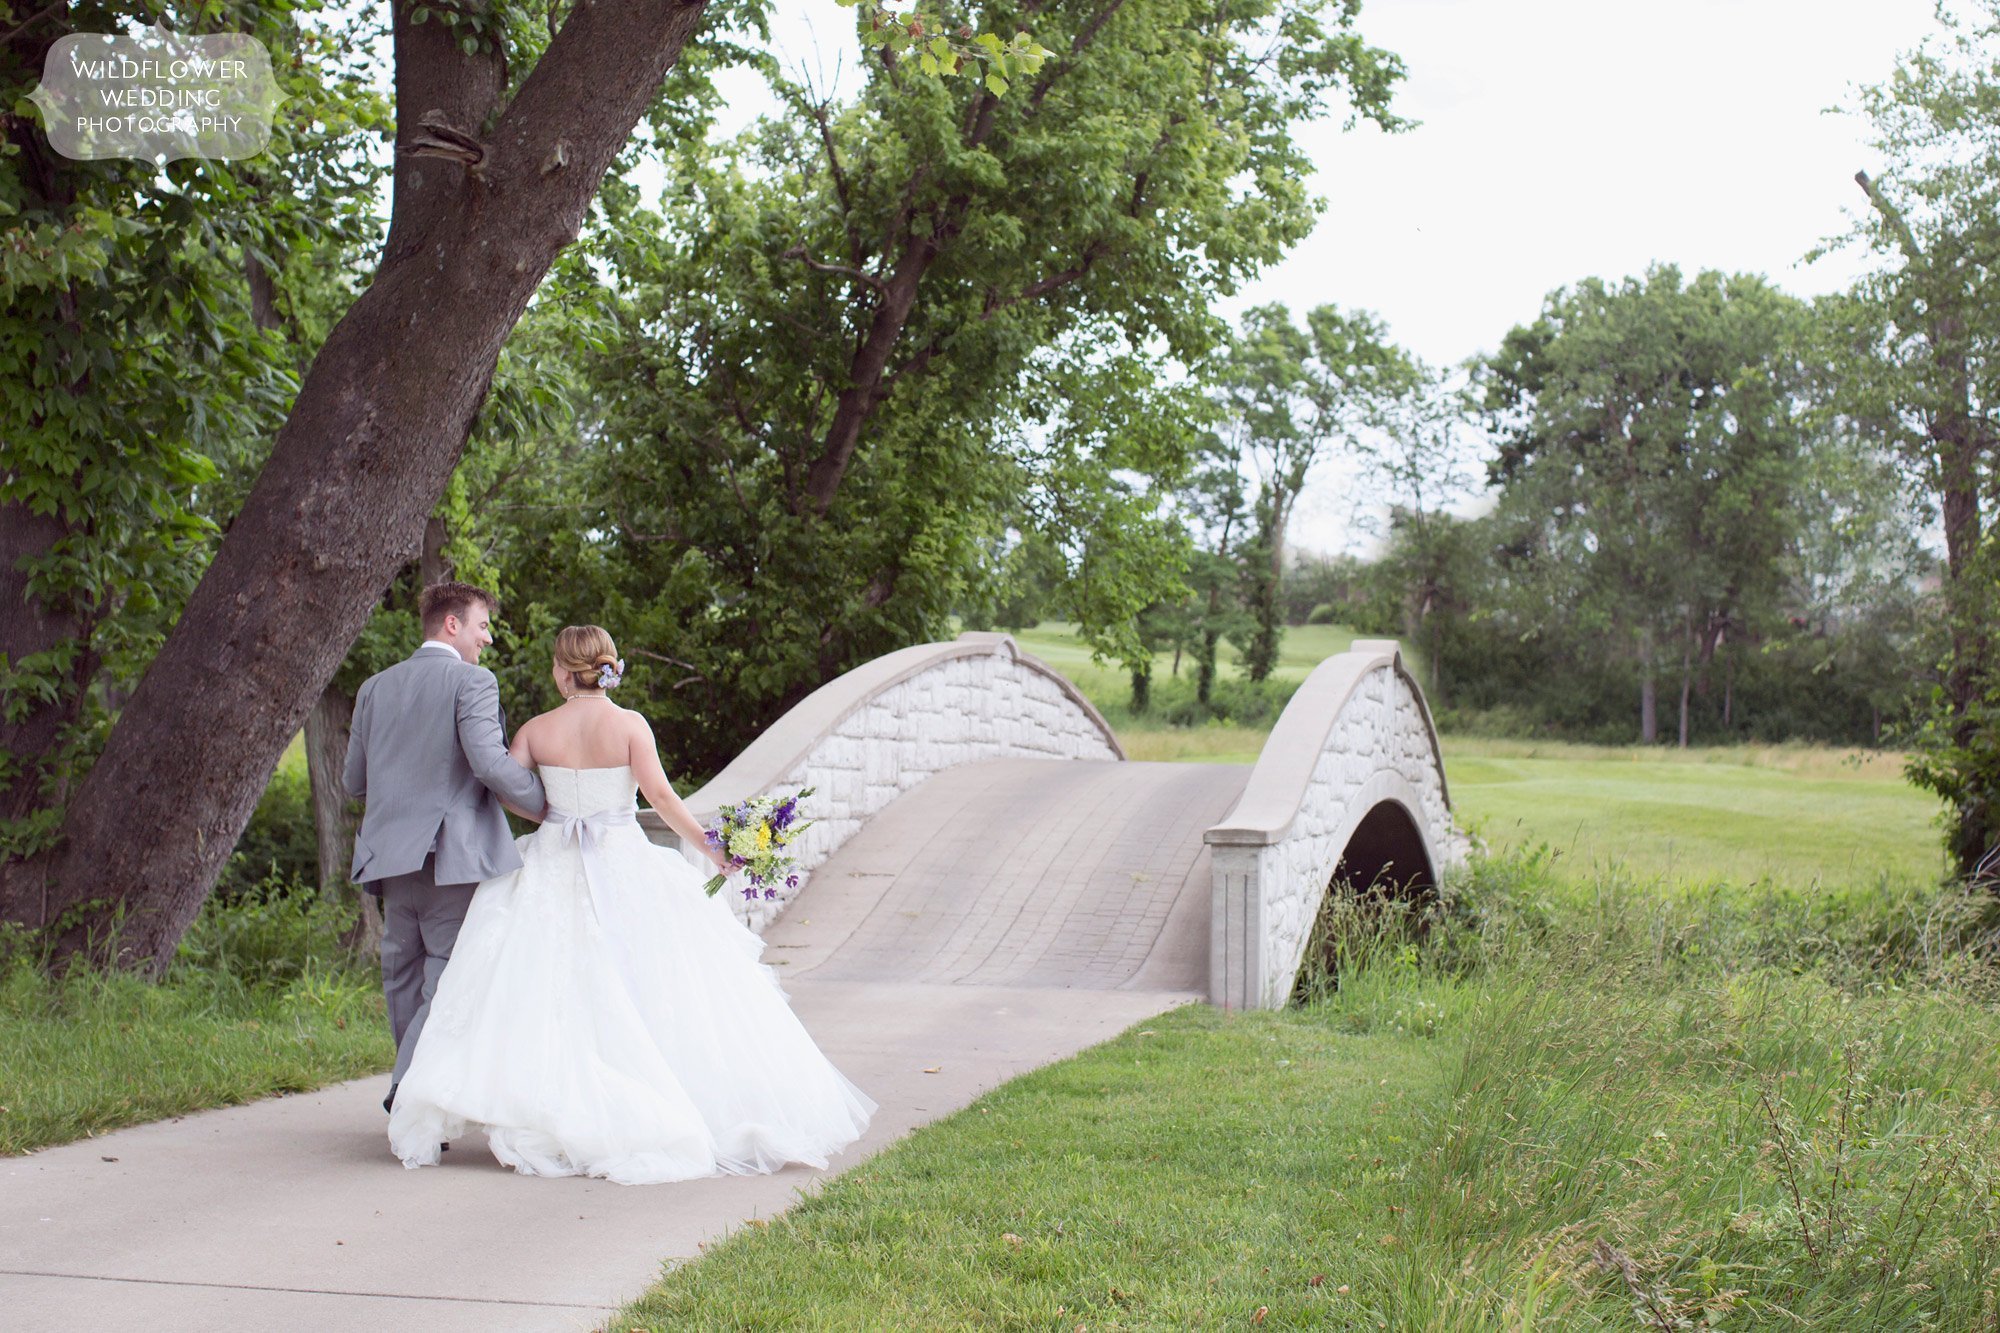 Fairytale wedding photo of the bride and groom at the Old Hawthorne Country Club in Columbia, MO.